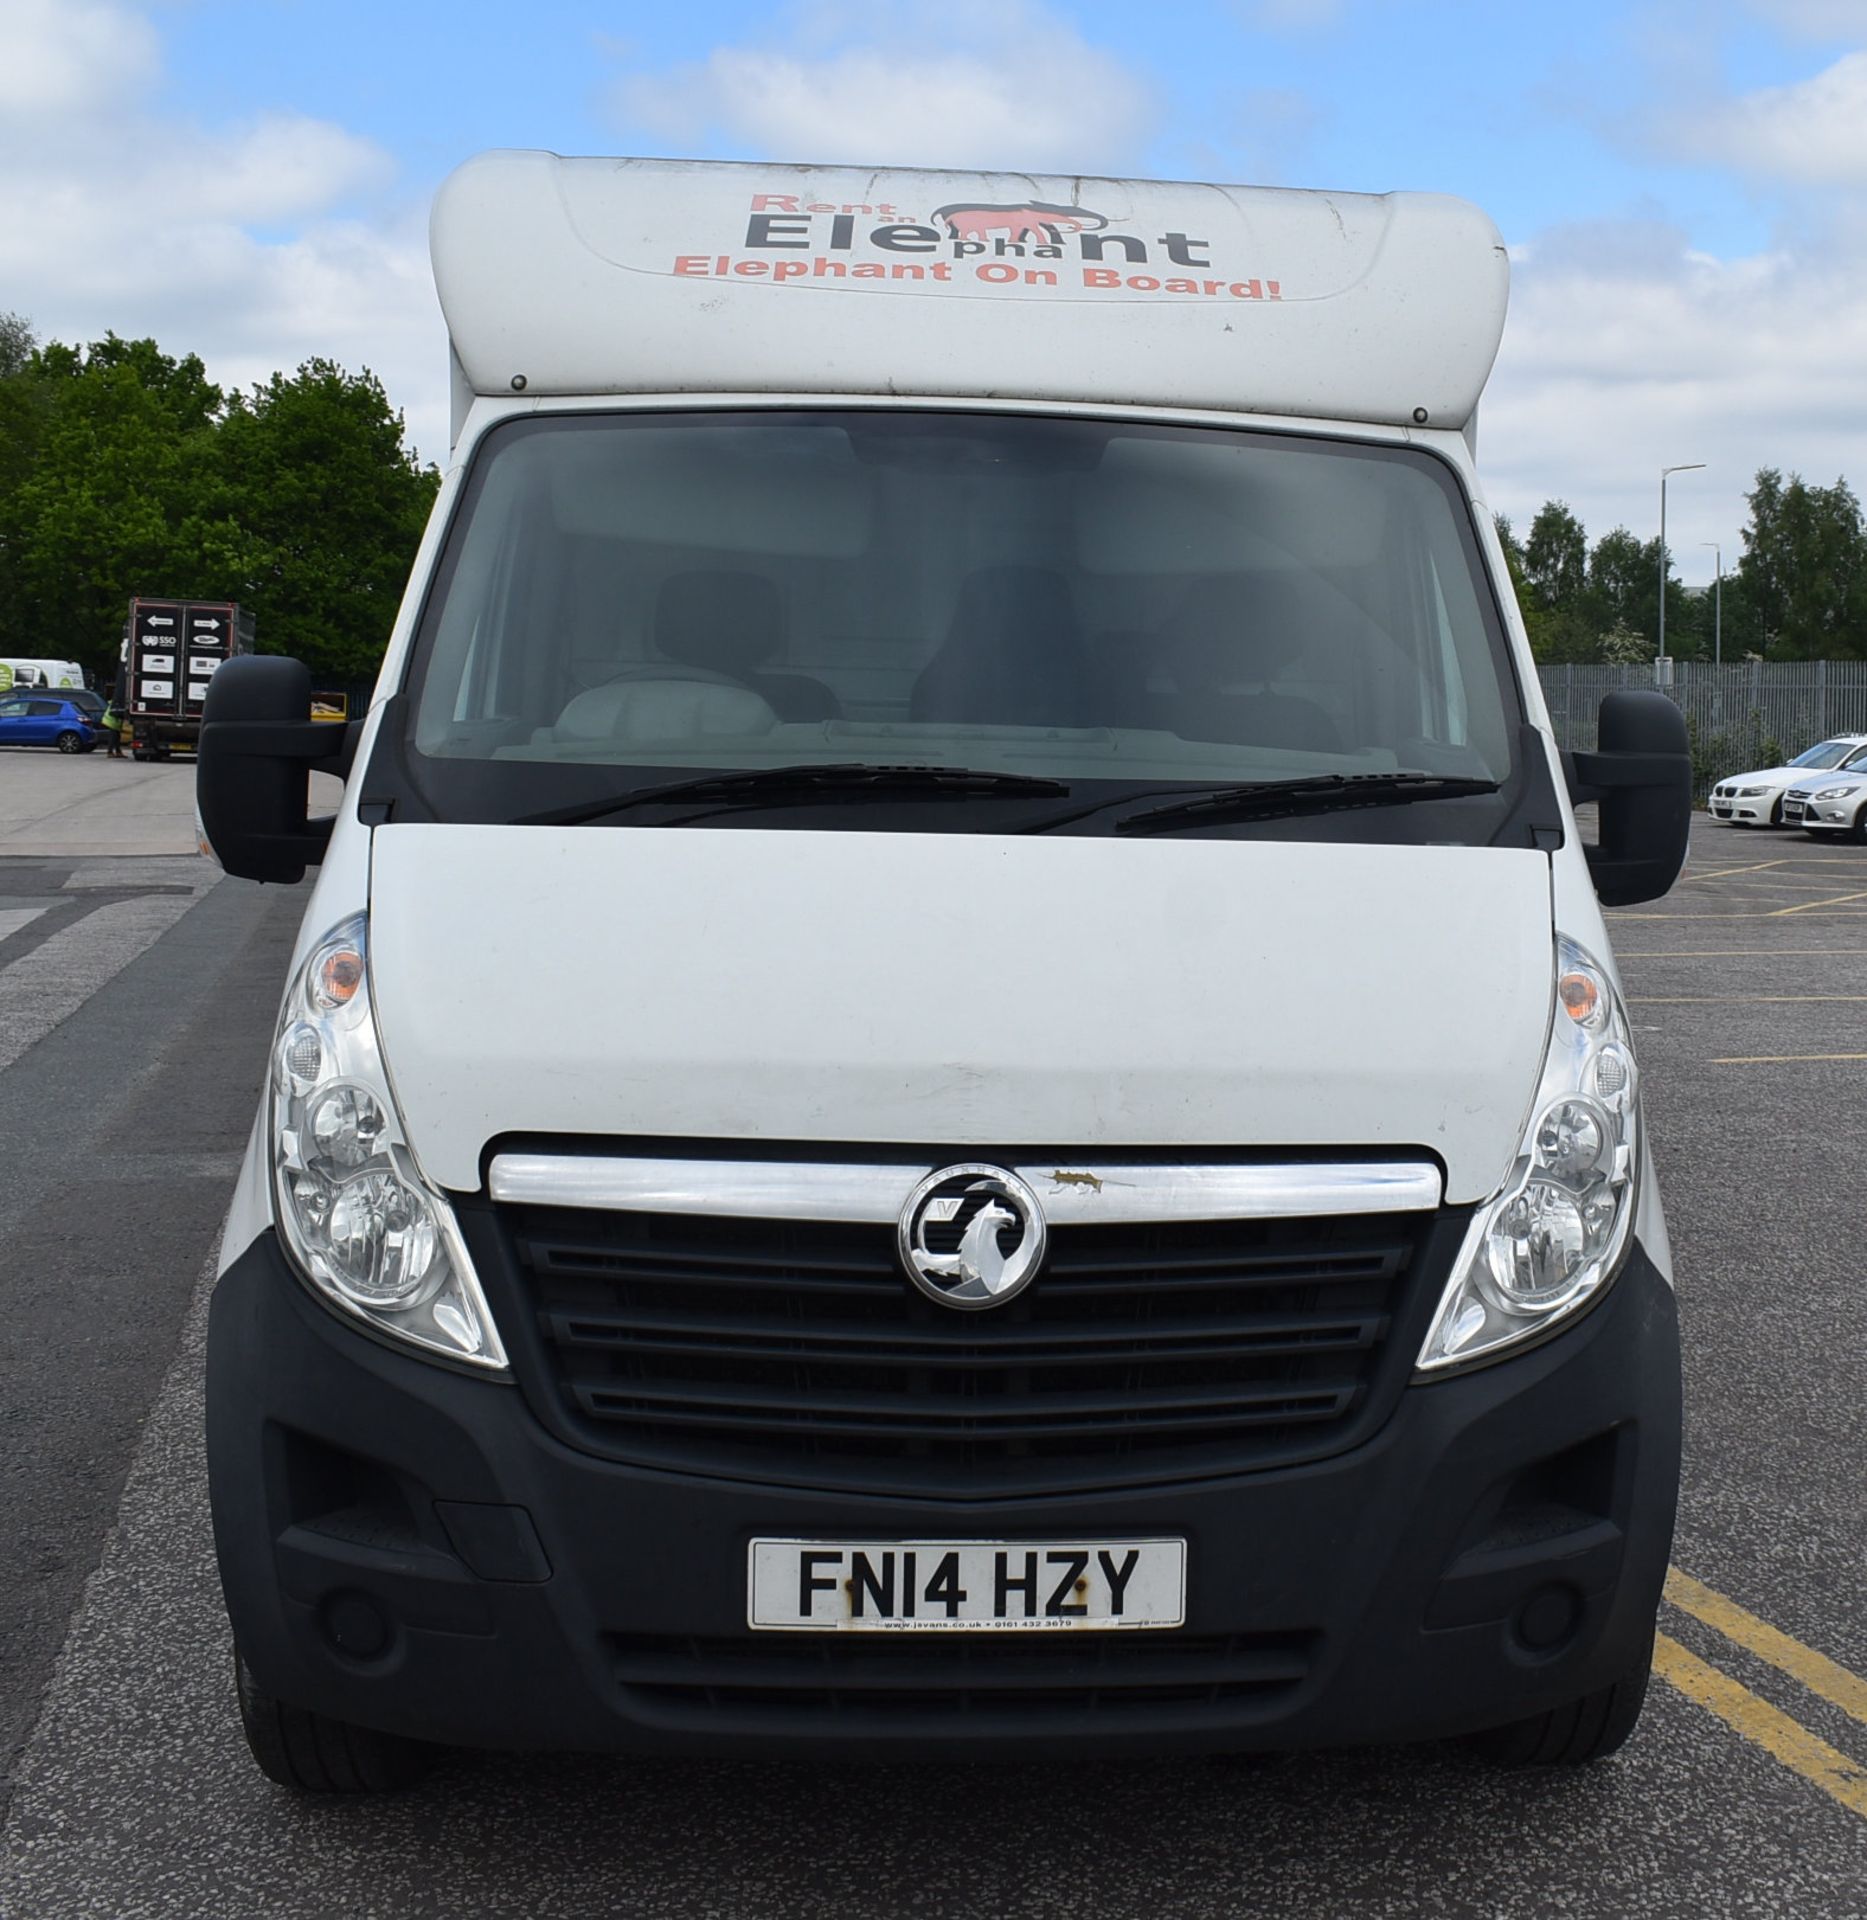 1 x Vauxhall Movano Box Van With Tail lift - 14 Plate - Includes 2 Keys - CL011 - Location: - Image 3 of 83